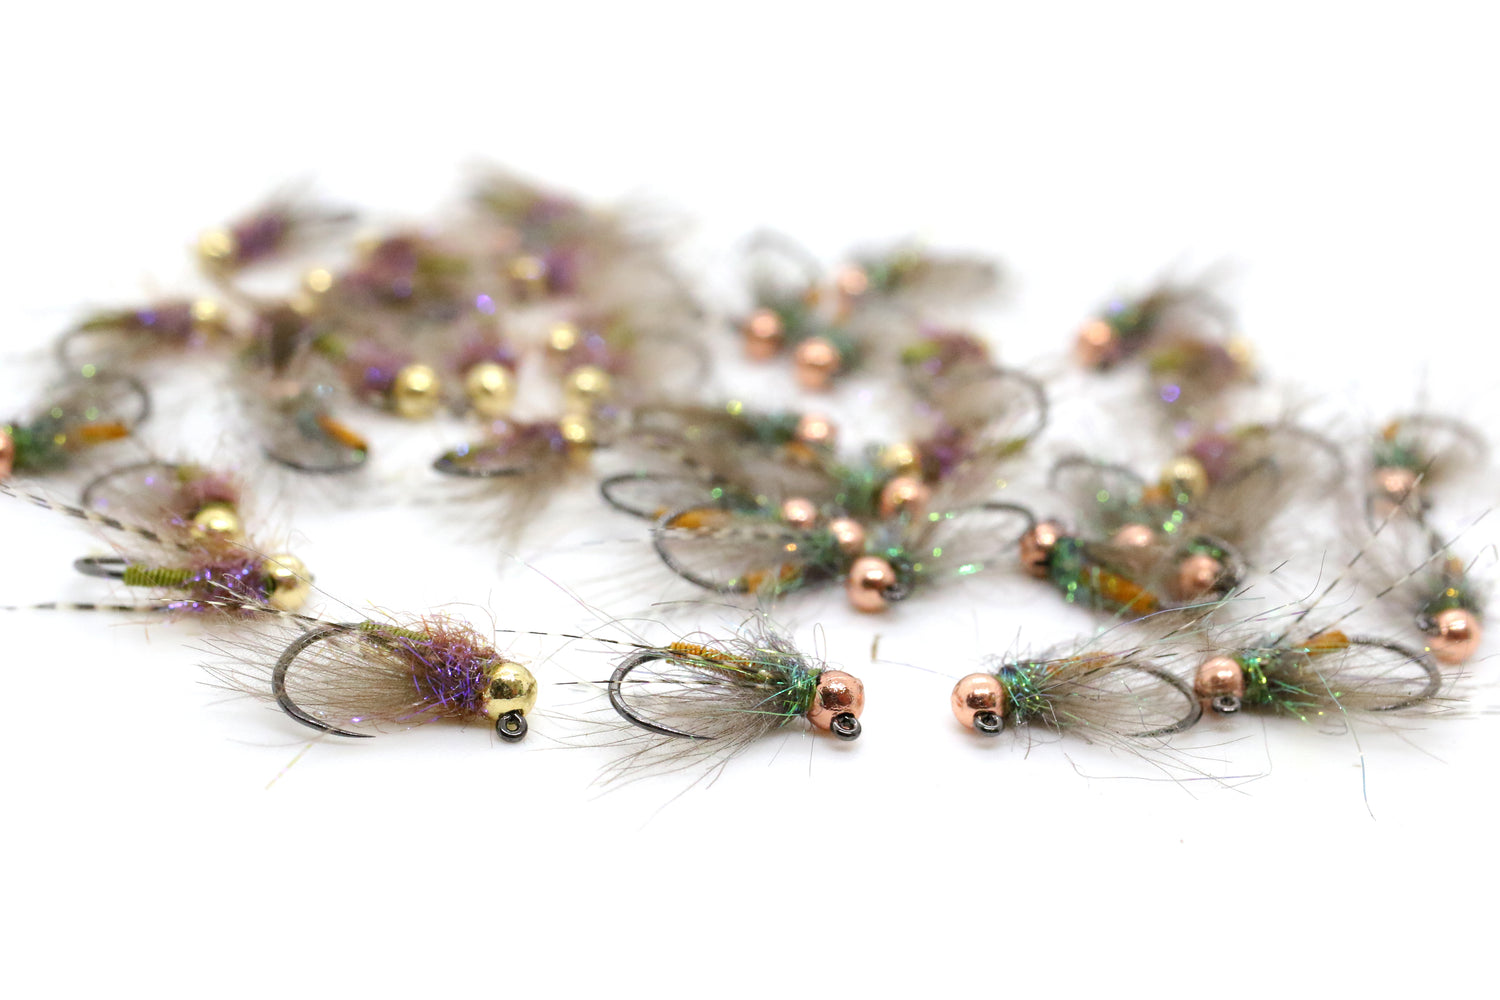 A bunch of caddis fly nymphs